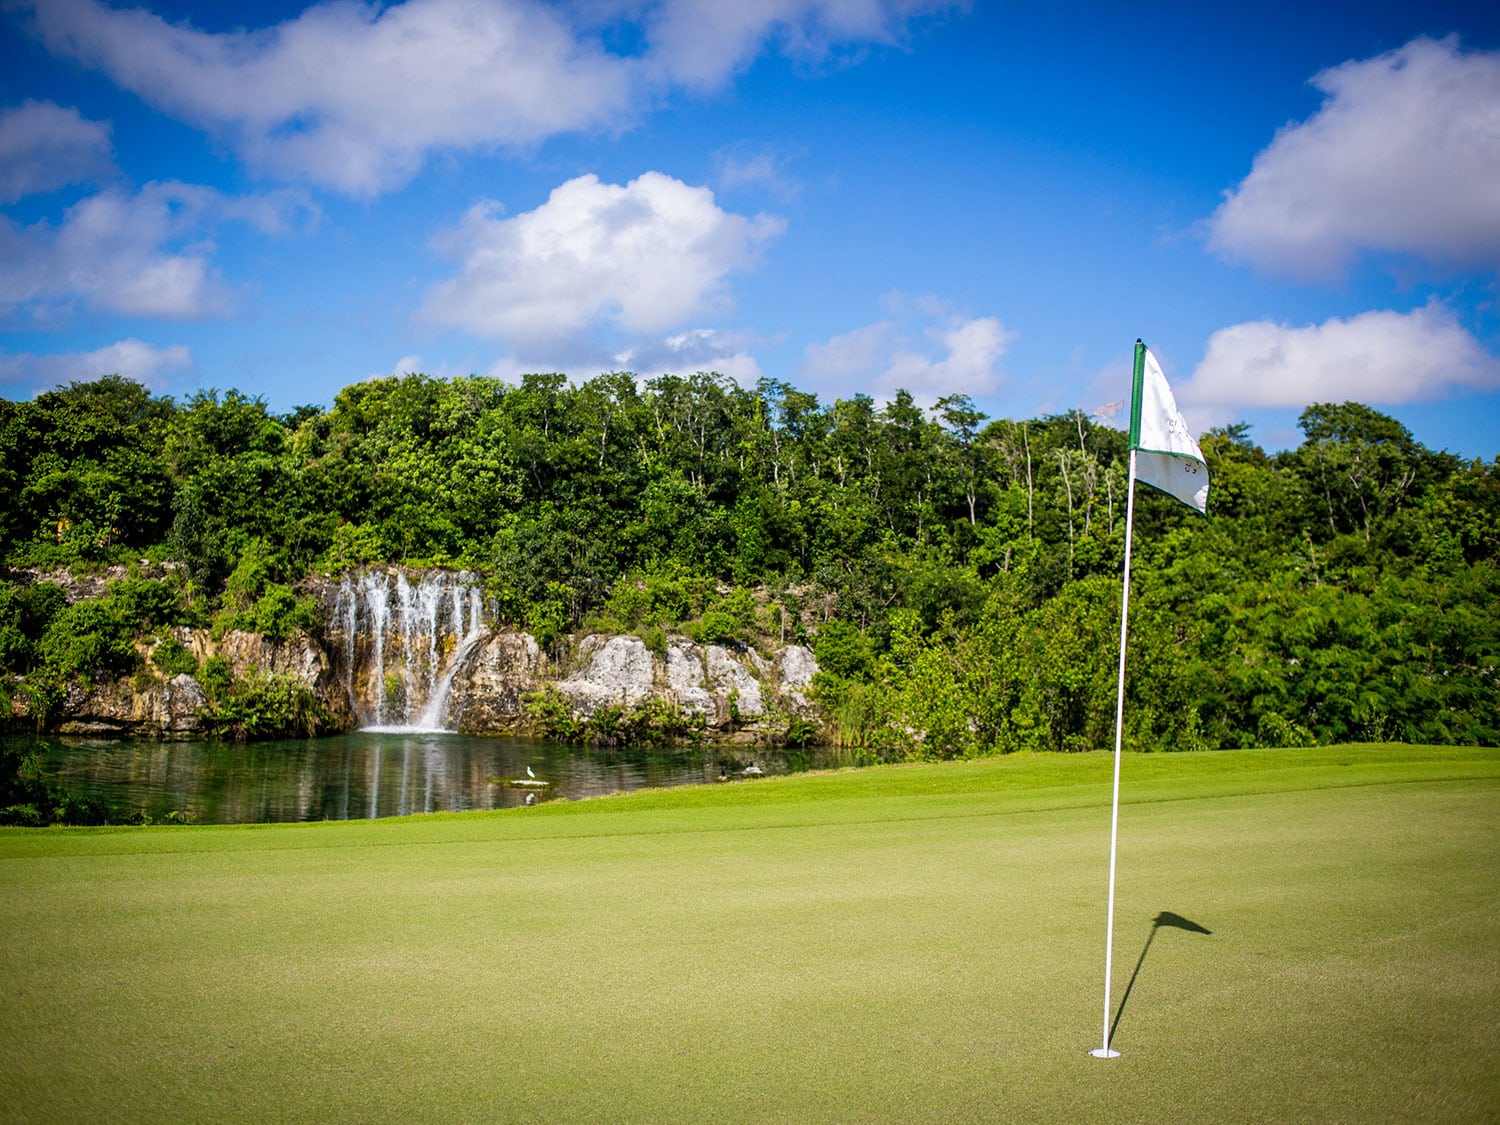 Hole 11 at the El Camaleón golf course is another example of the amazing natural beauty here.